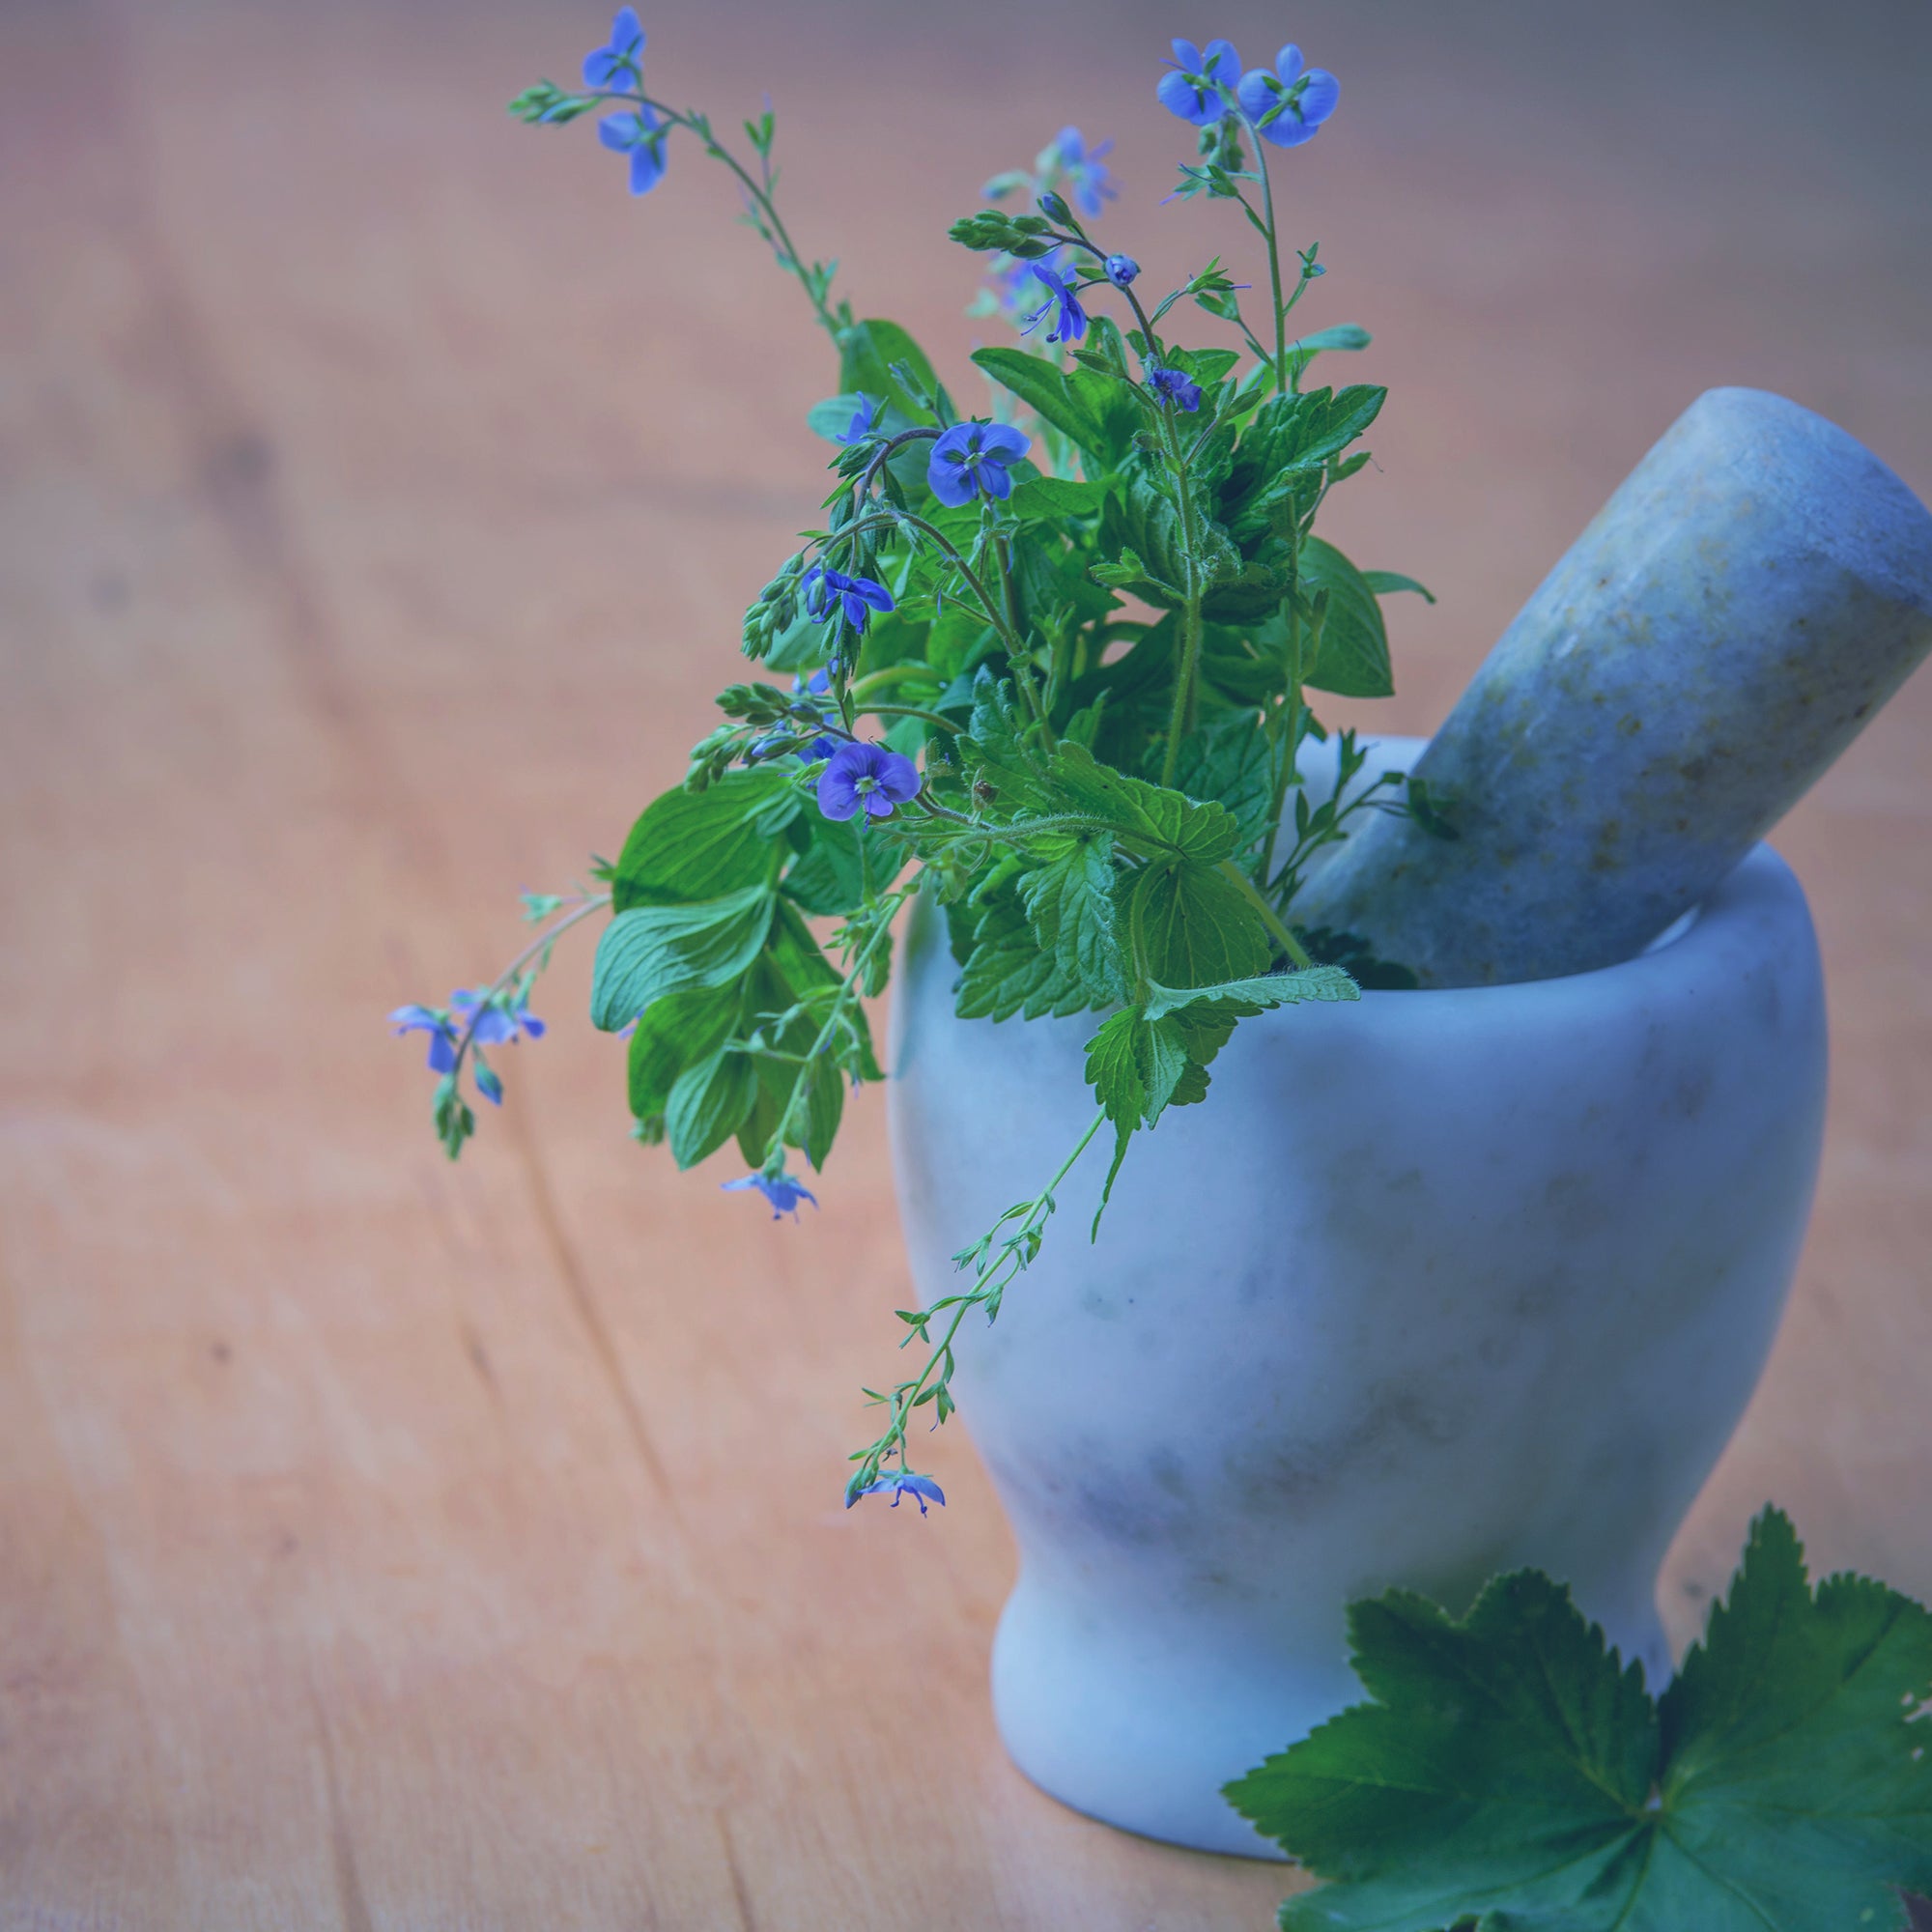 A mortar and pestle with a purple flower in it